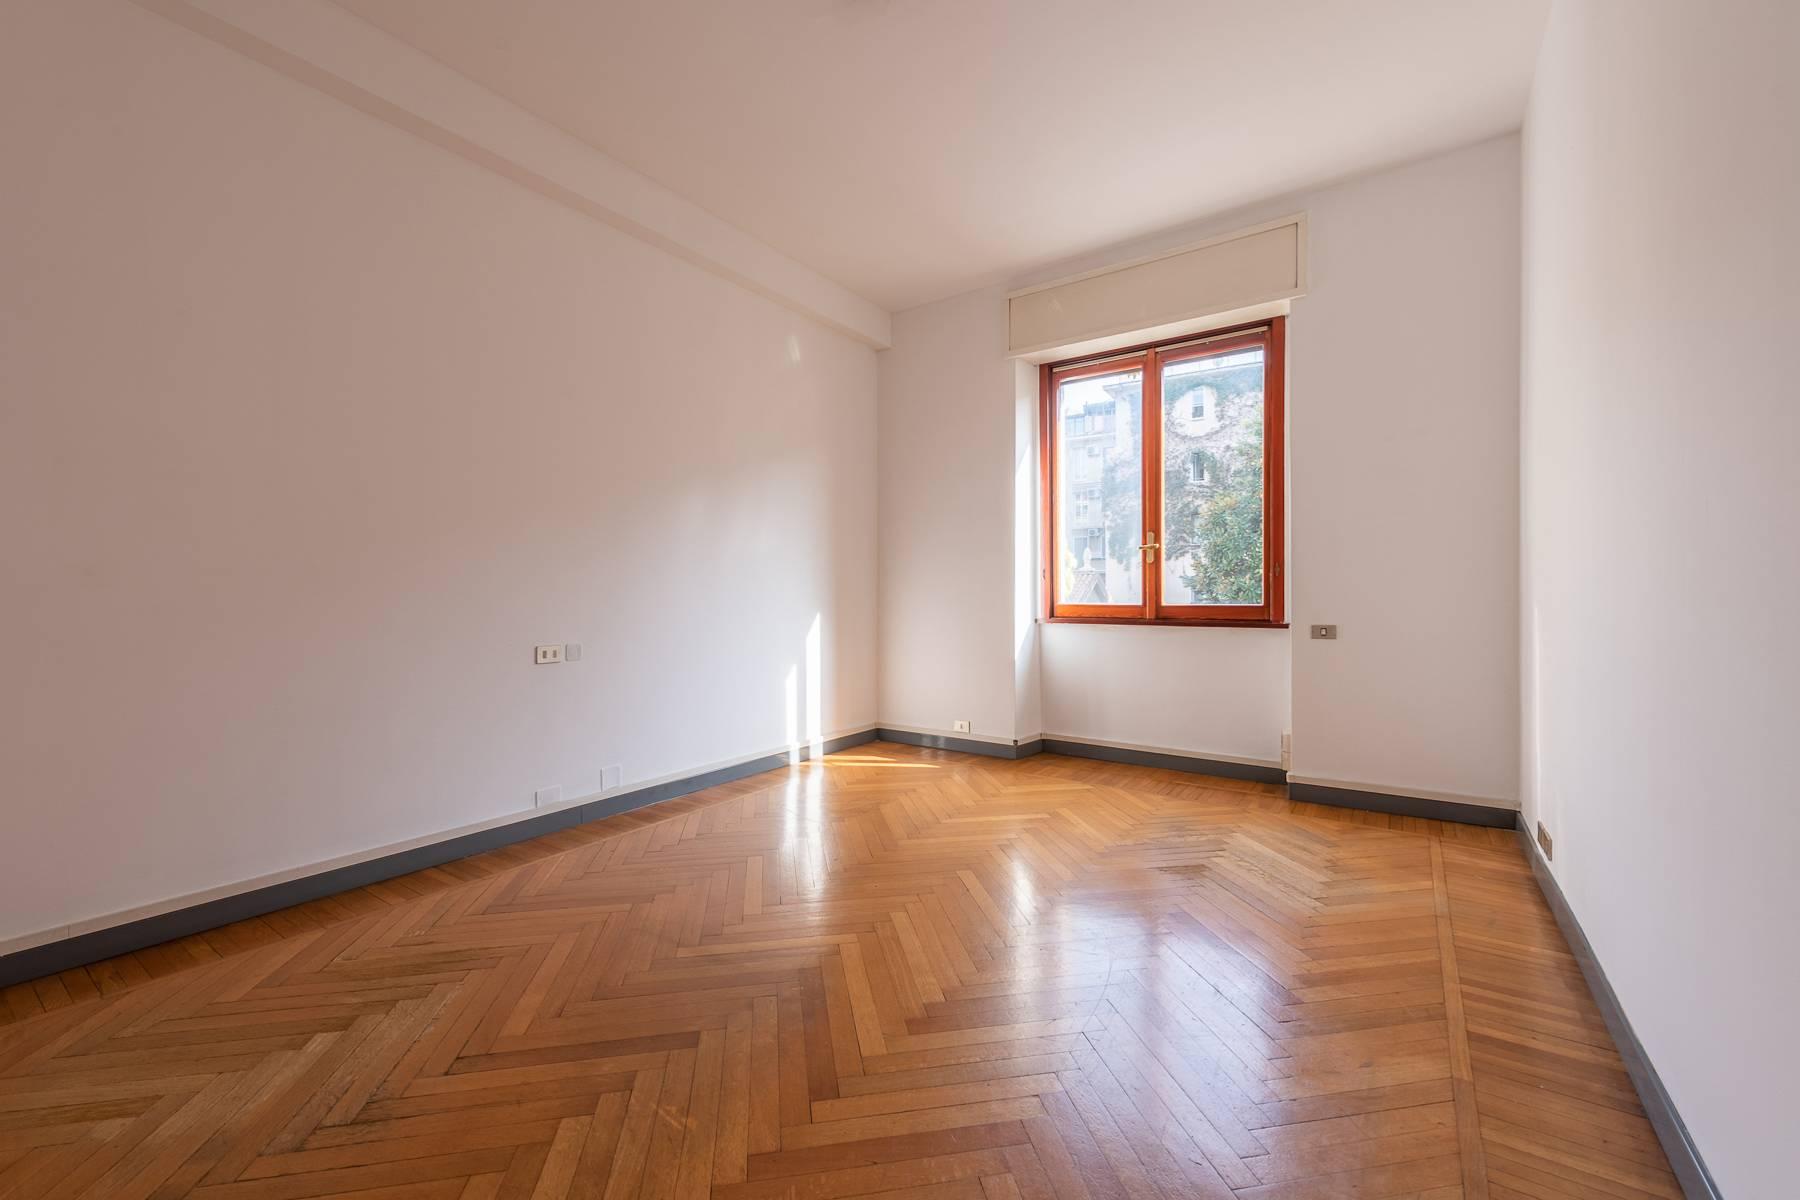 Office of about 200 square meters for rent in the Court area - 17